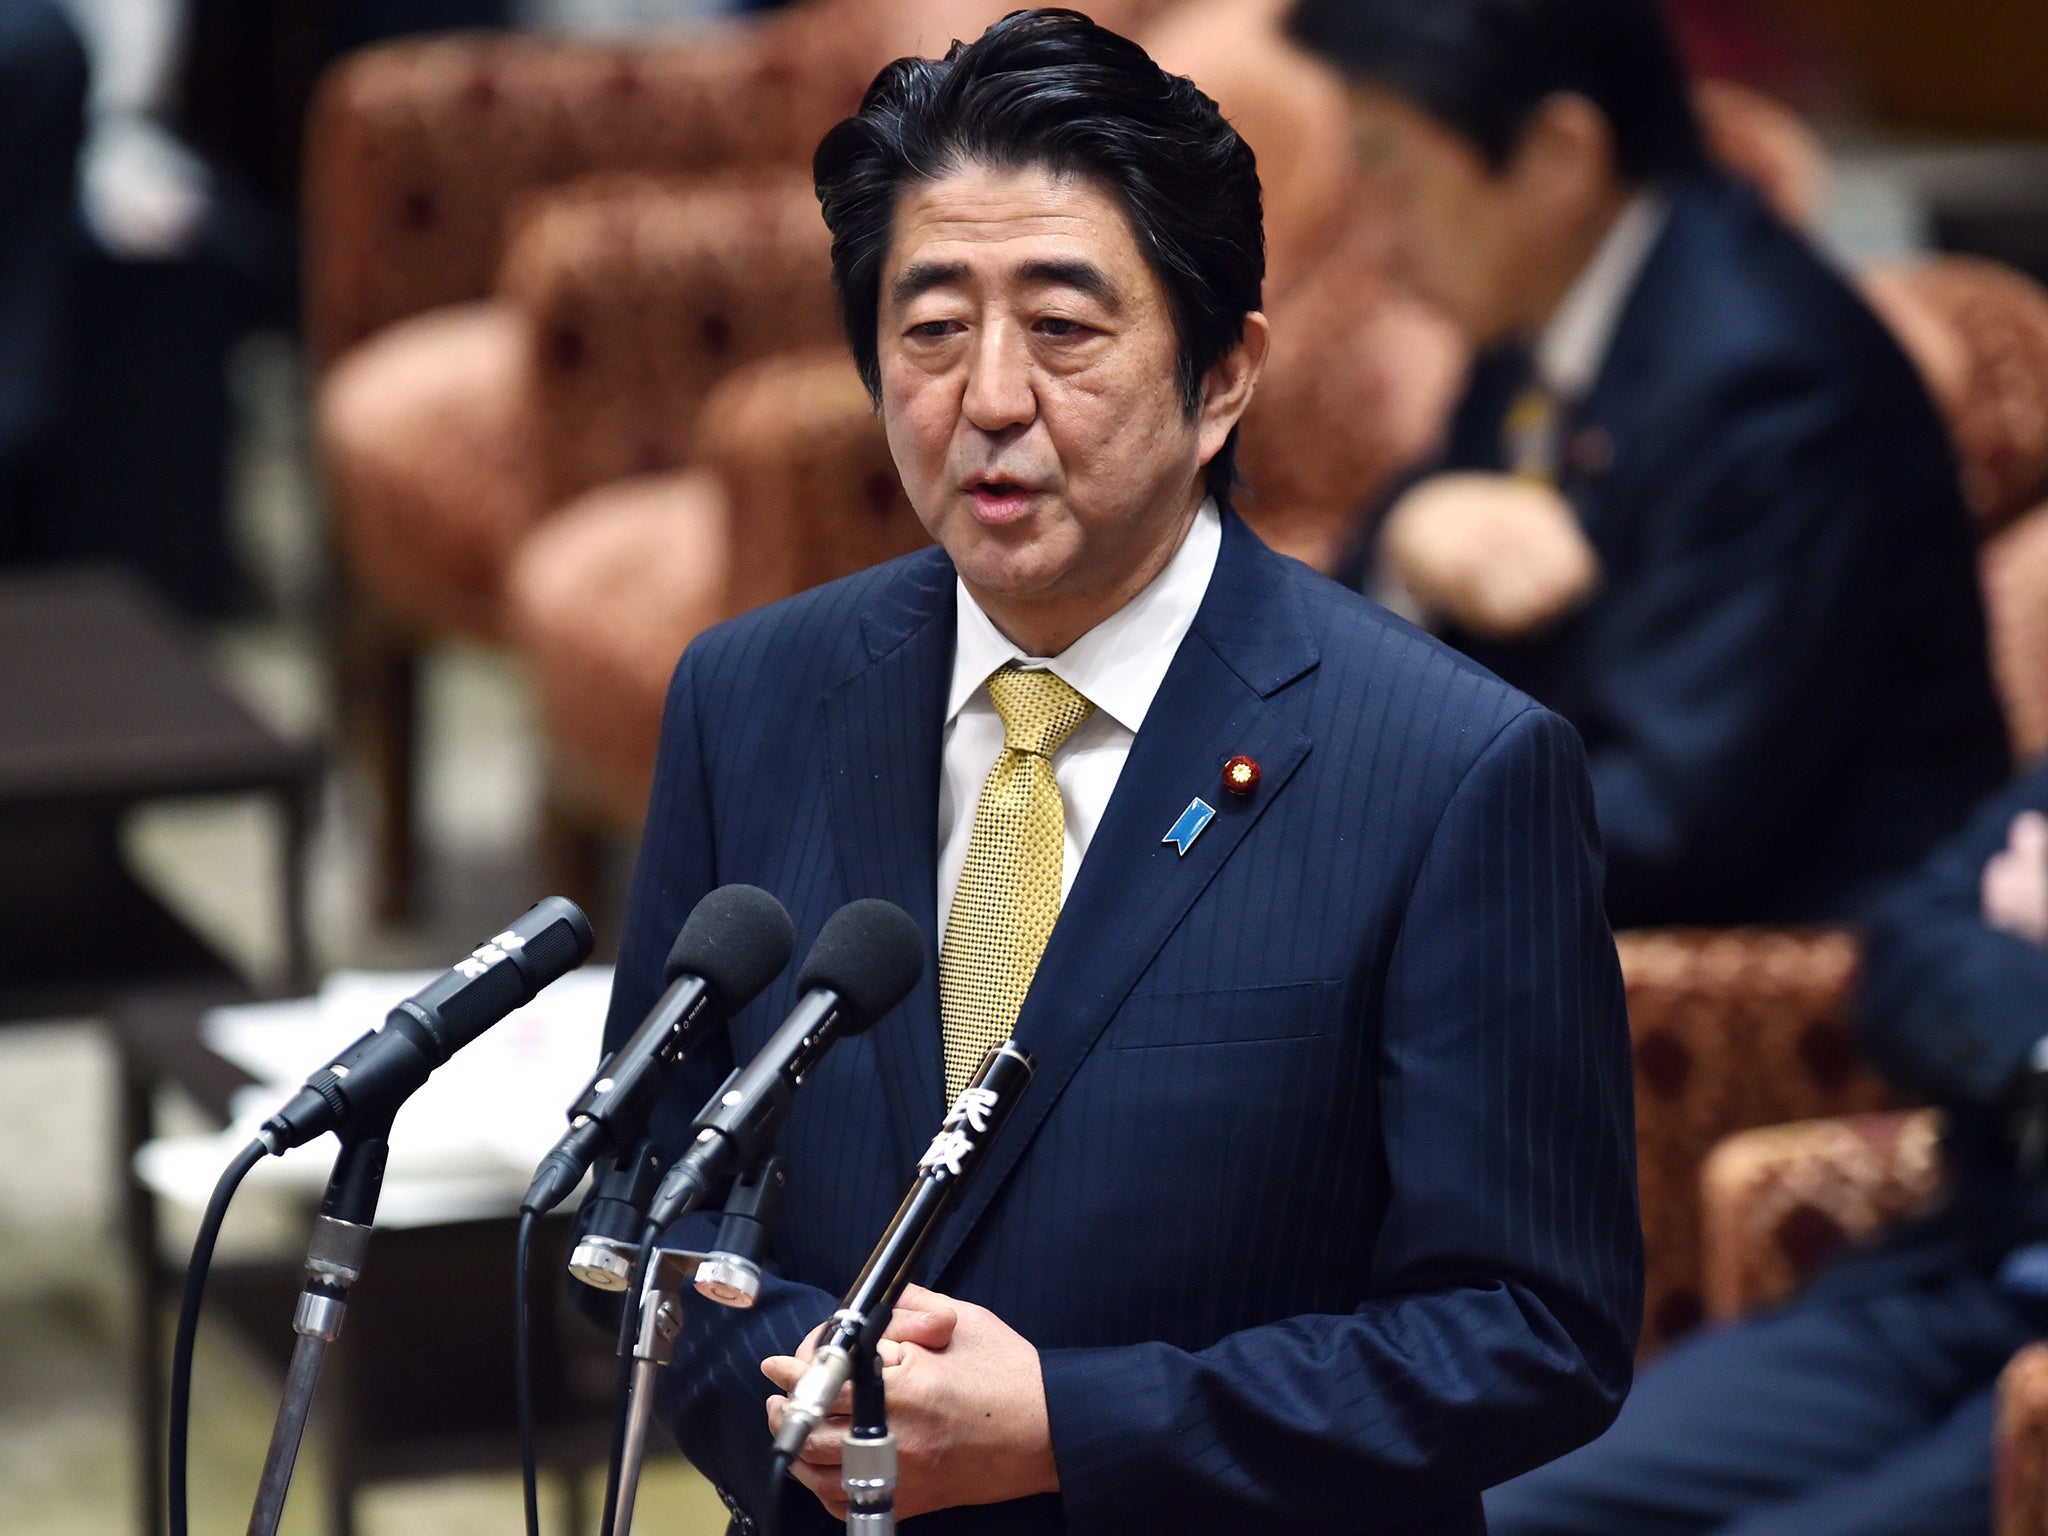 Japan’s government run by Shinzo Abe is considering allowing 200,000 foreigners a year to enter the country